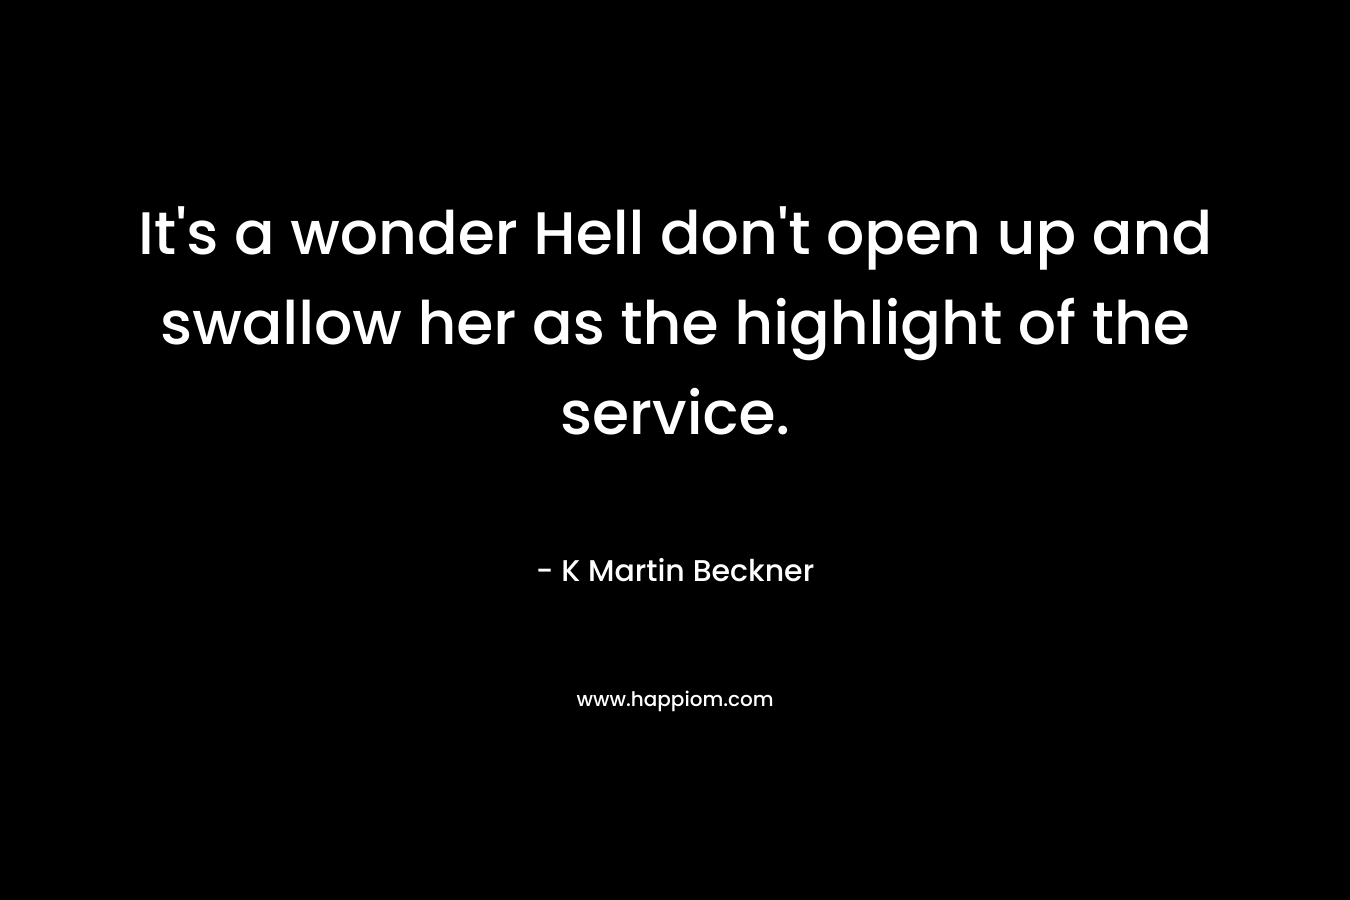 It’s a wonder Hell don’t open up and swallow her as the highlight of the service. – K Martin Beckner